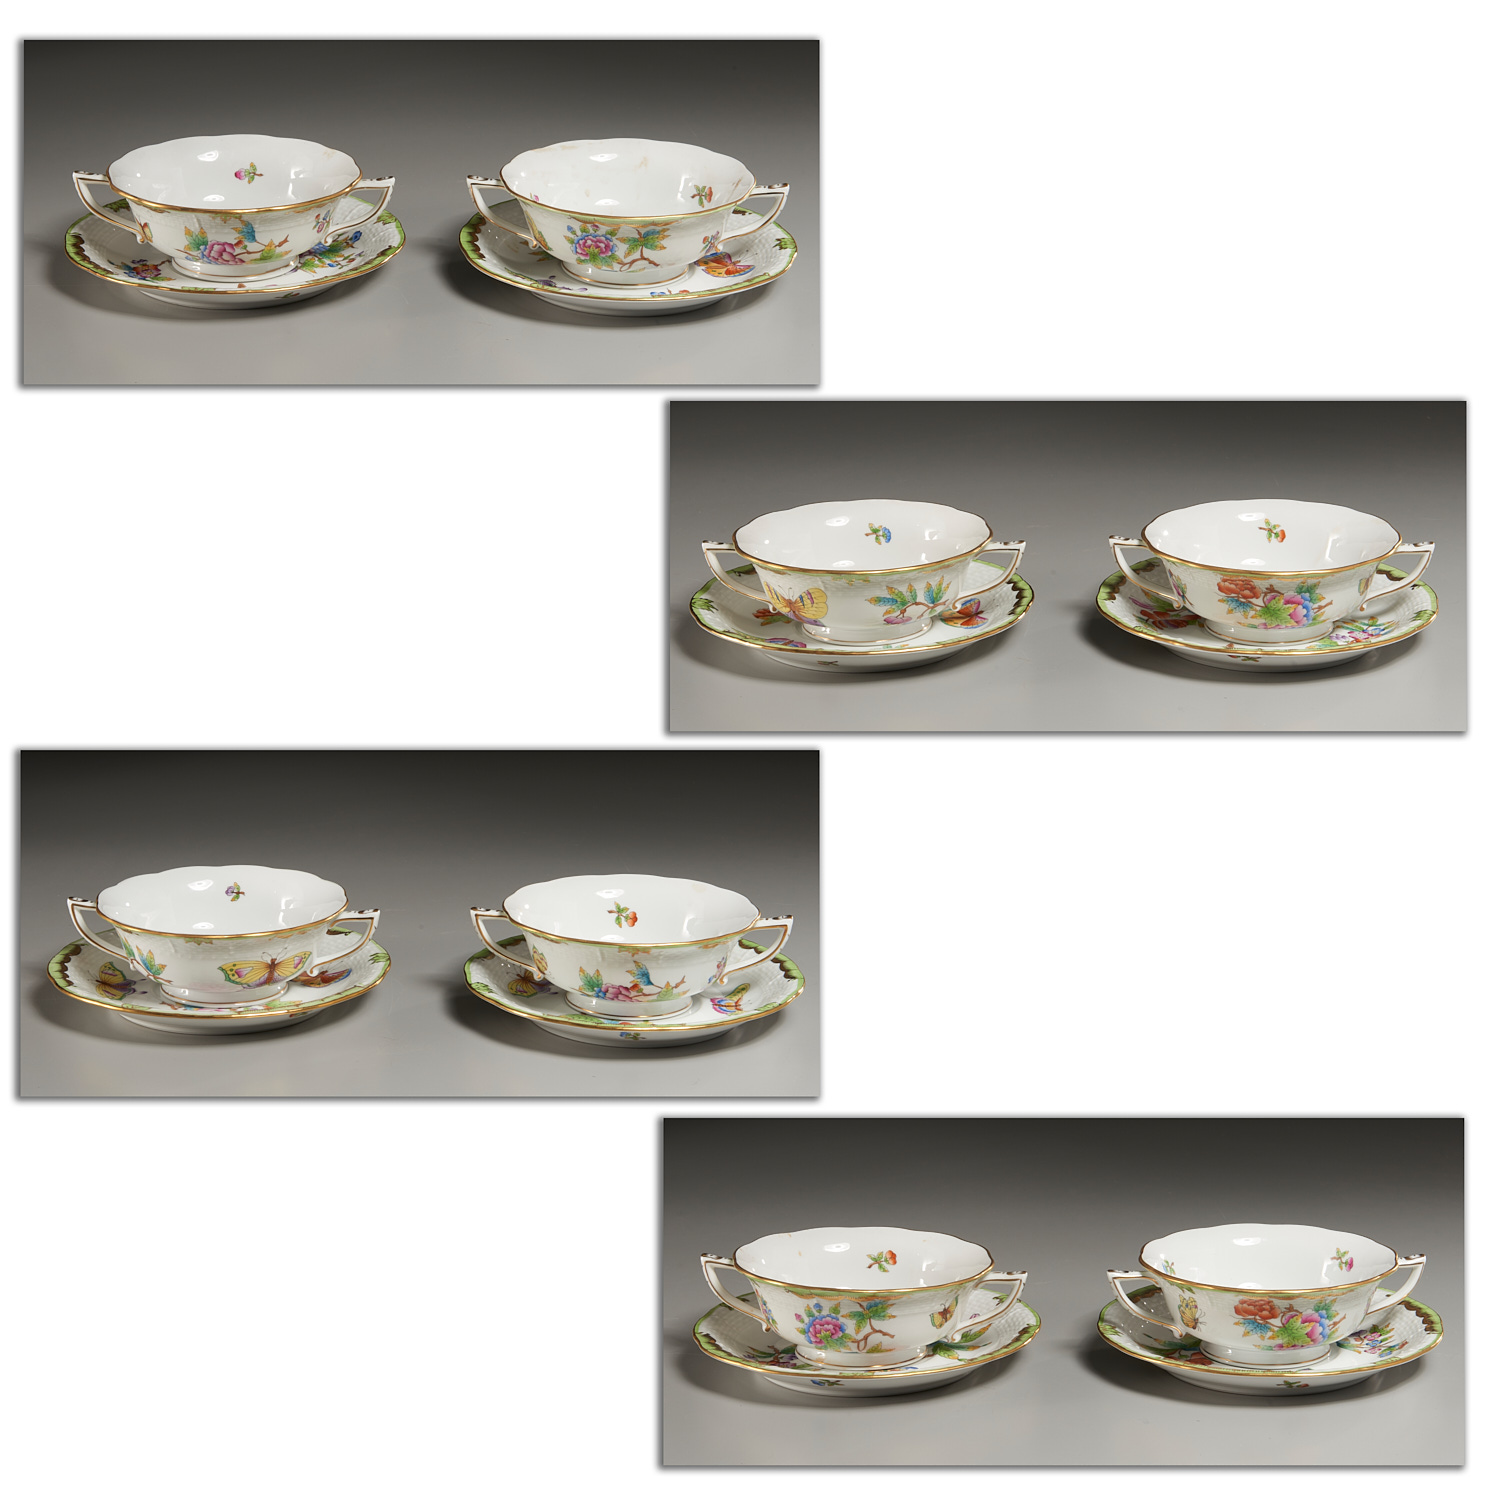 (8) HEREND PORCELAIN SOUP CUPS